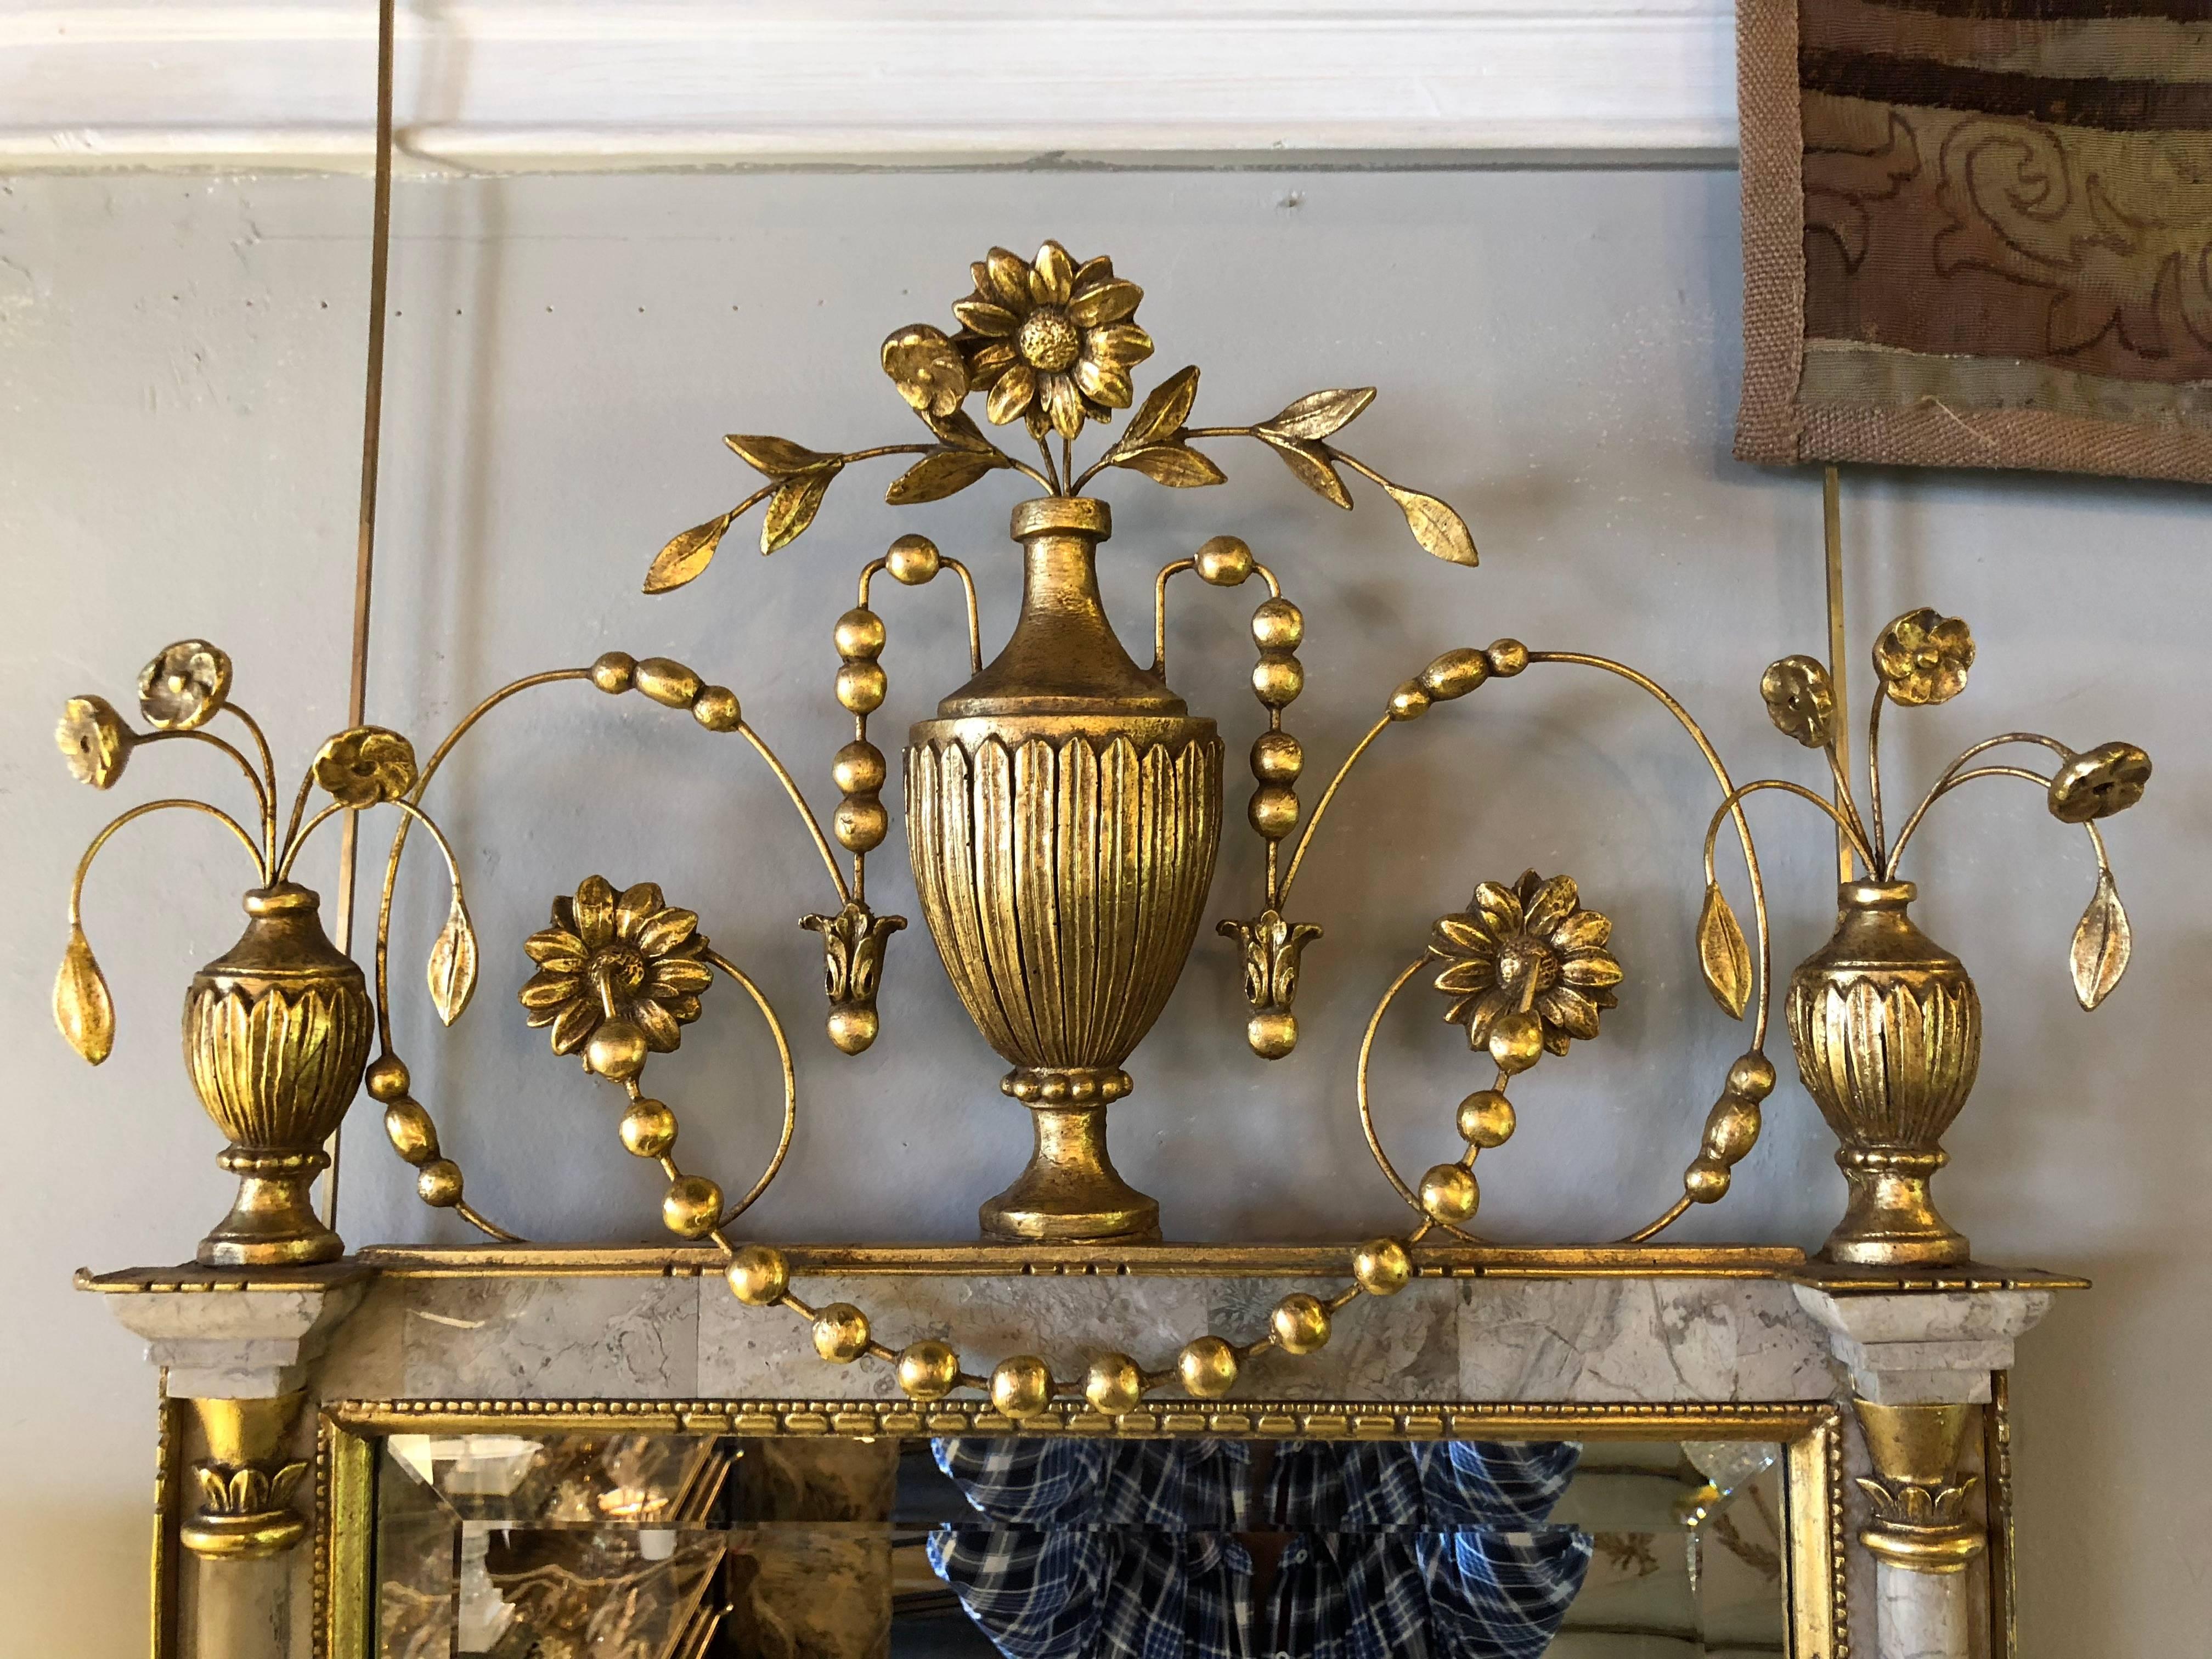 A fine pair of gilt Northern Italian wall or console mirrors. The center beveled mirror flanked by a marble column formed frame. The marble insert columns framed in a gilt gold wood carved case. The whole with fine floral leaf and vine with rose